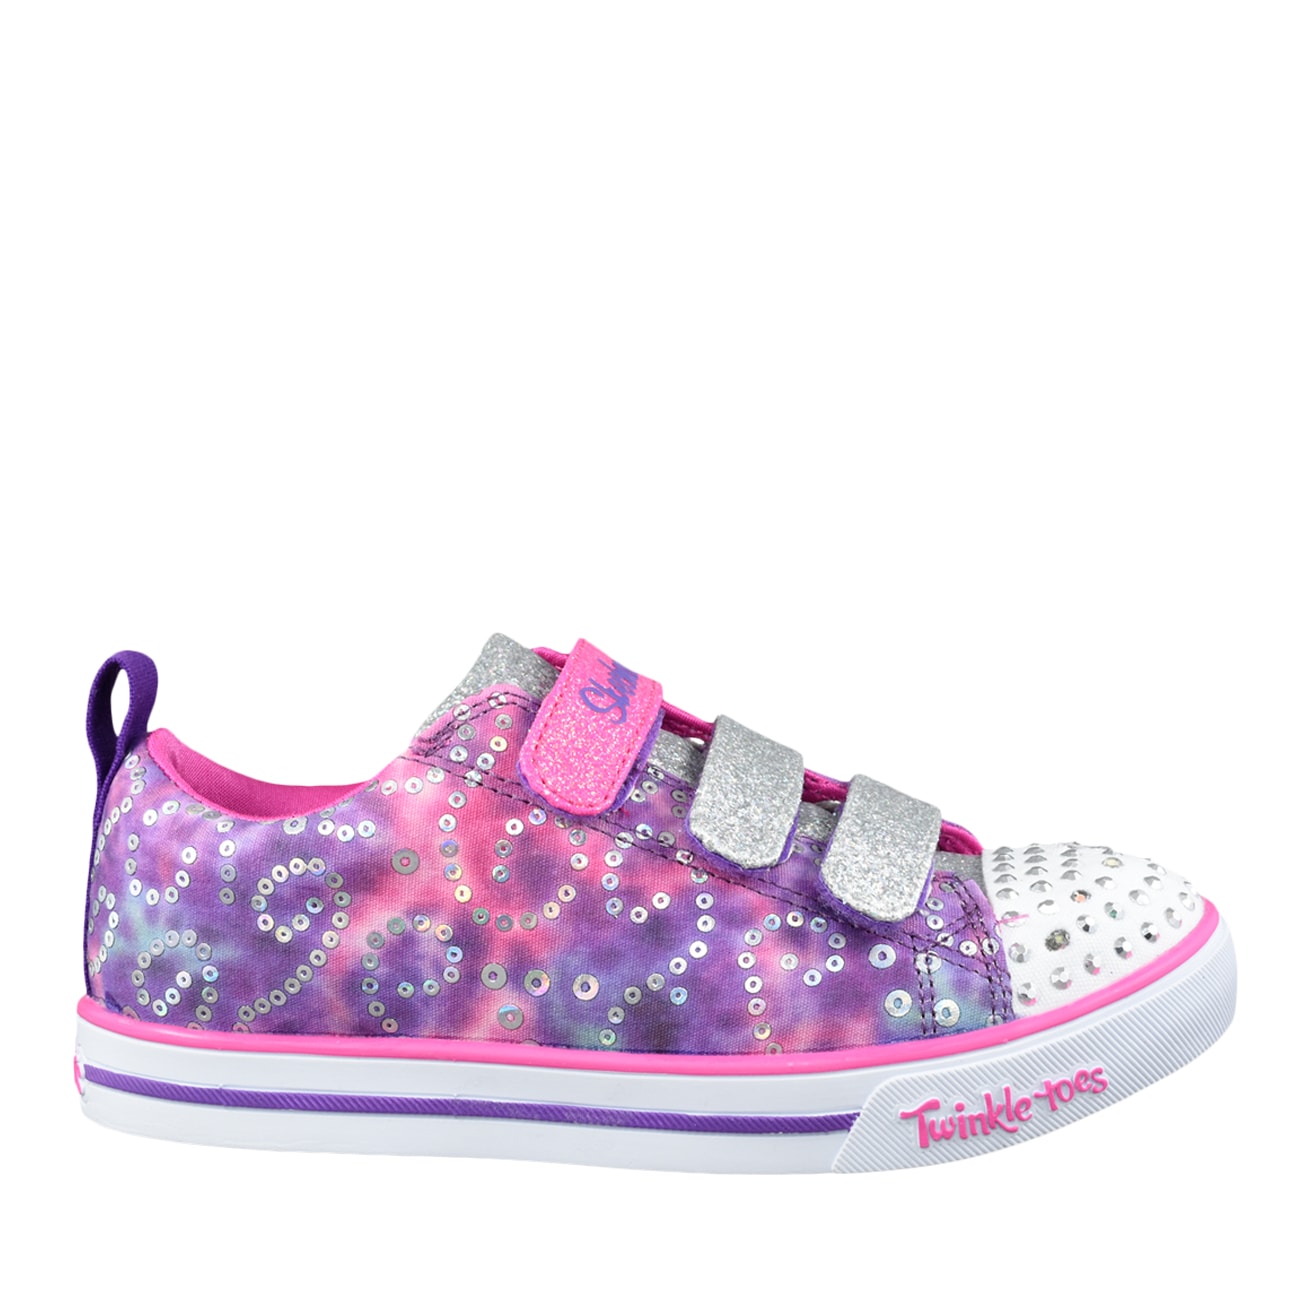 Skechers Youth Girl's Sparkle Lite - Rainbow Brights Sneaker | DSW Canada